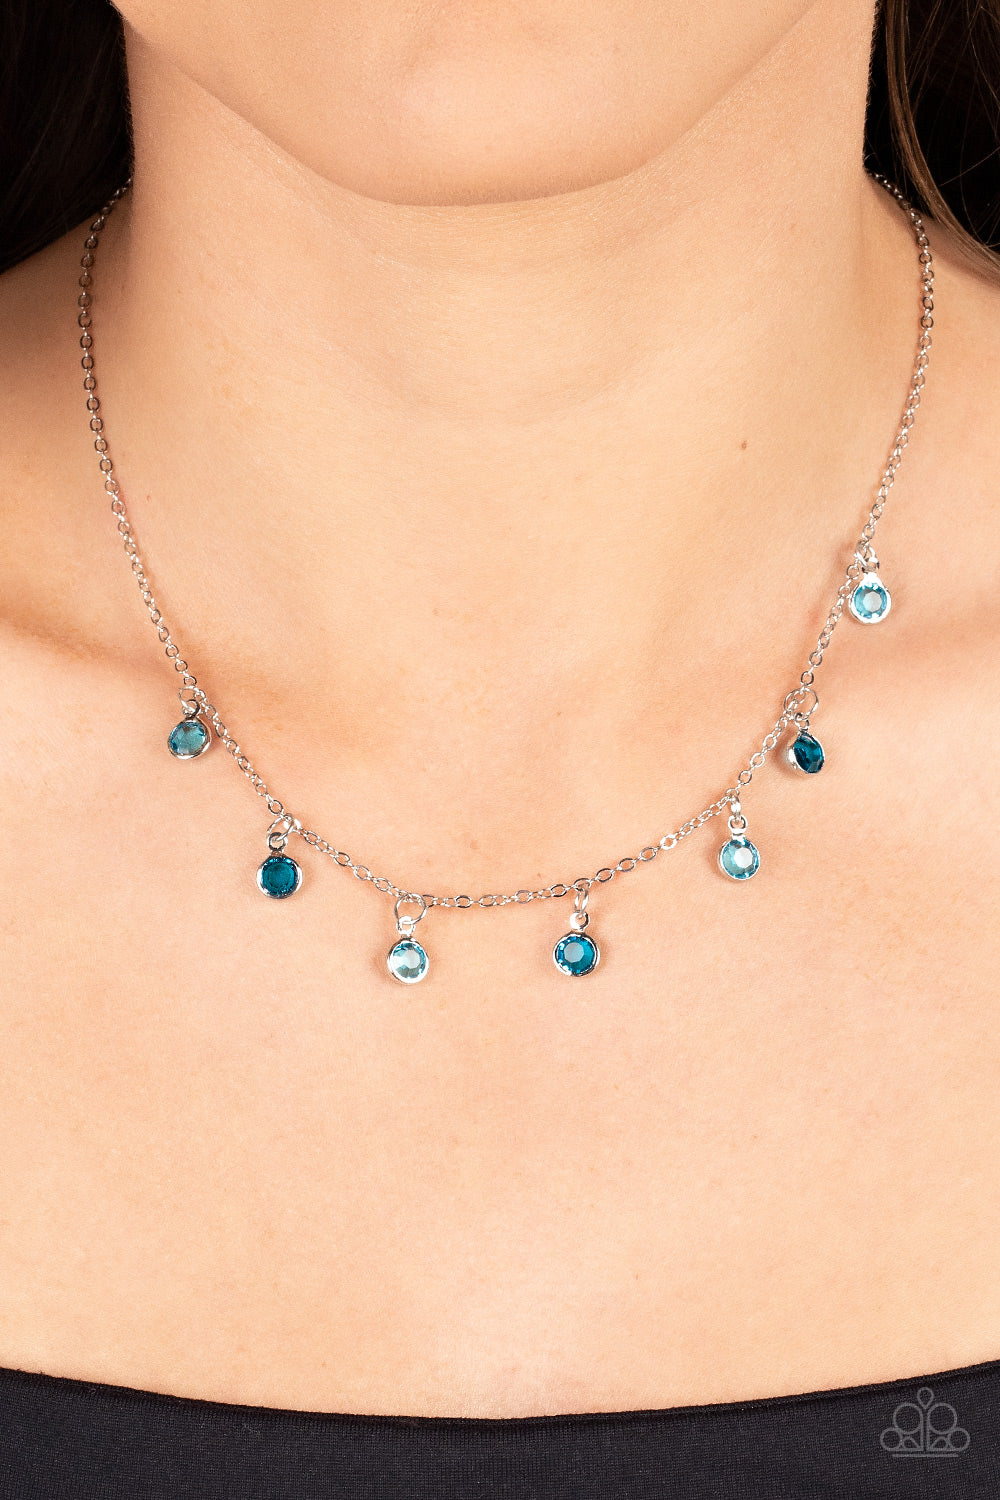 Paparazzi “Carefree Charmer” Blue Necklace Earrings Set